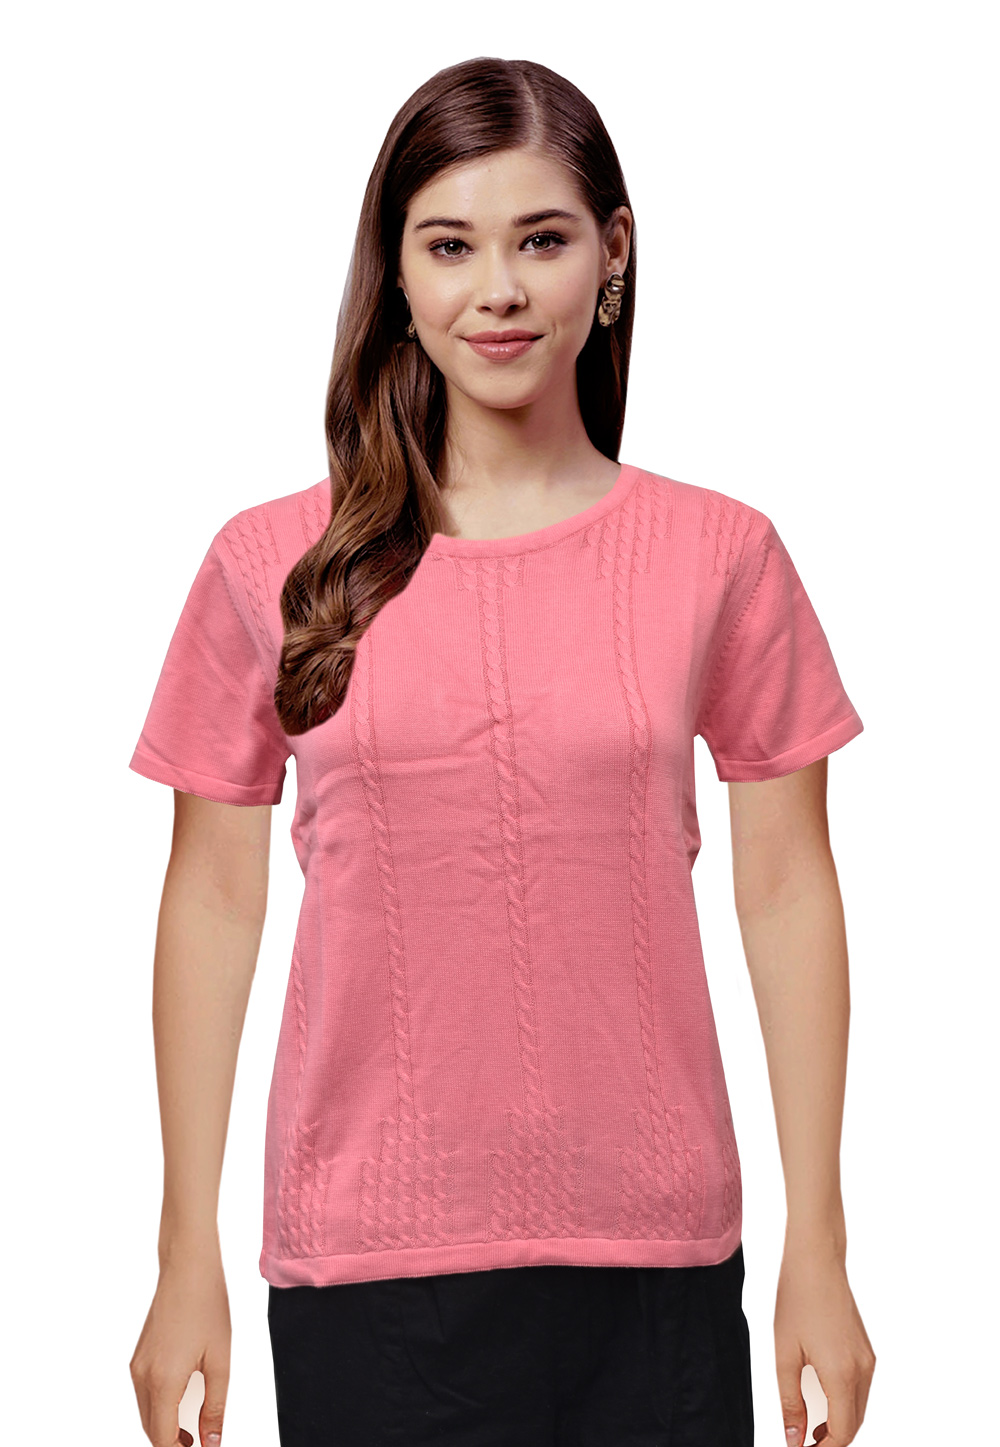 Pink Woolen Knitted Sweater Tops 214258